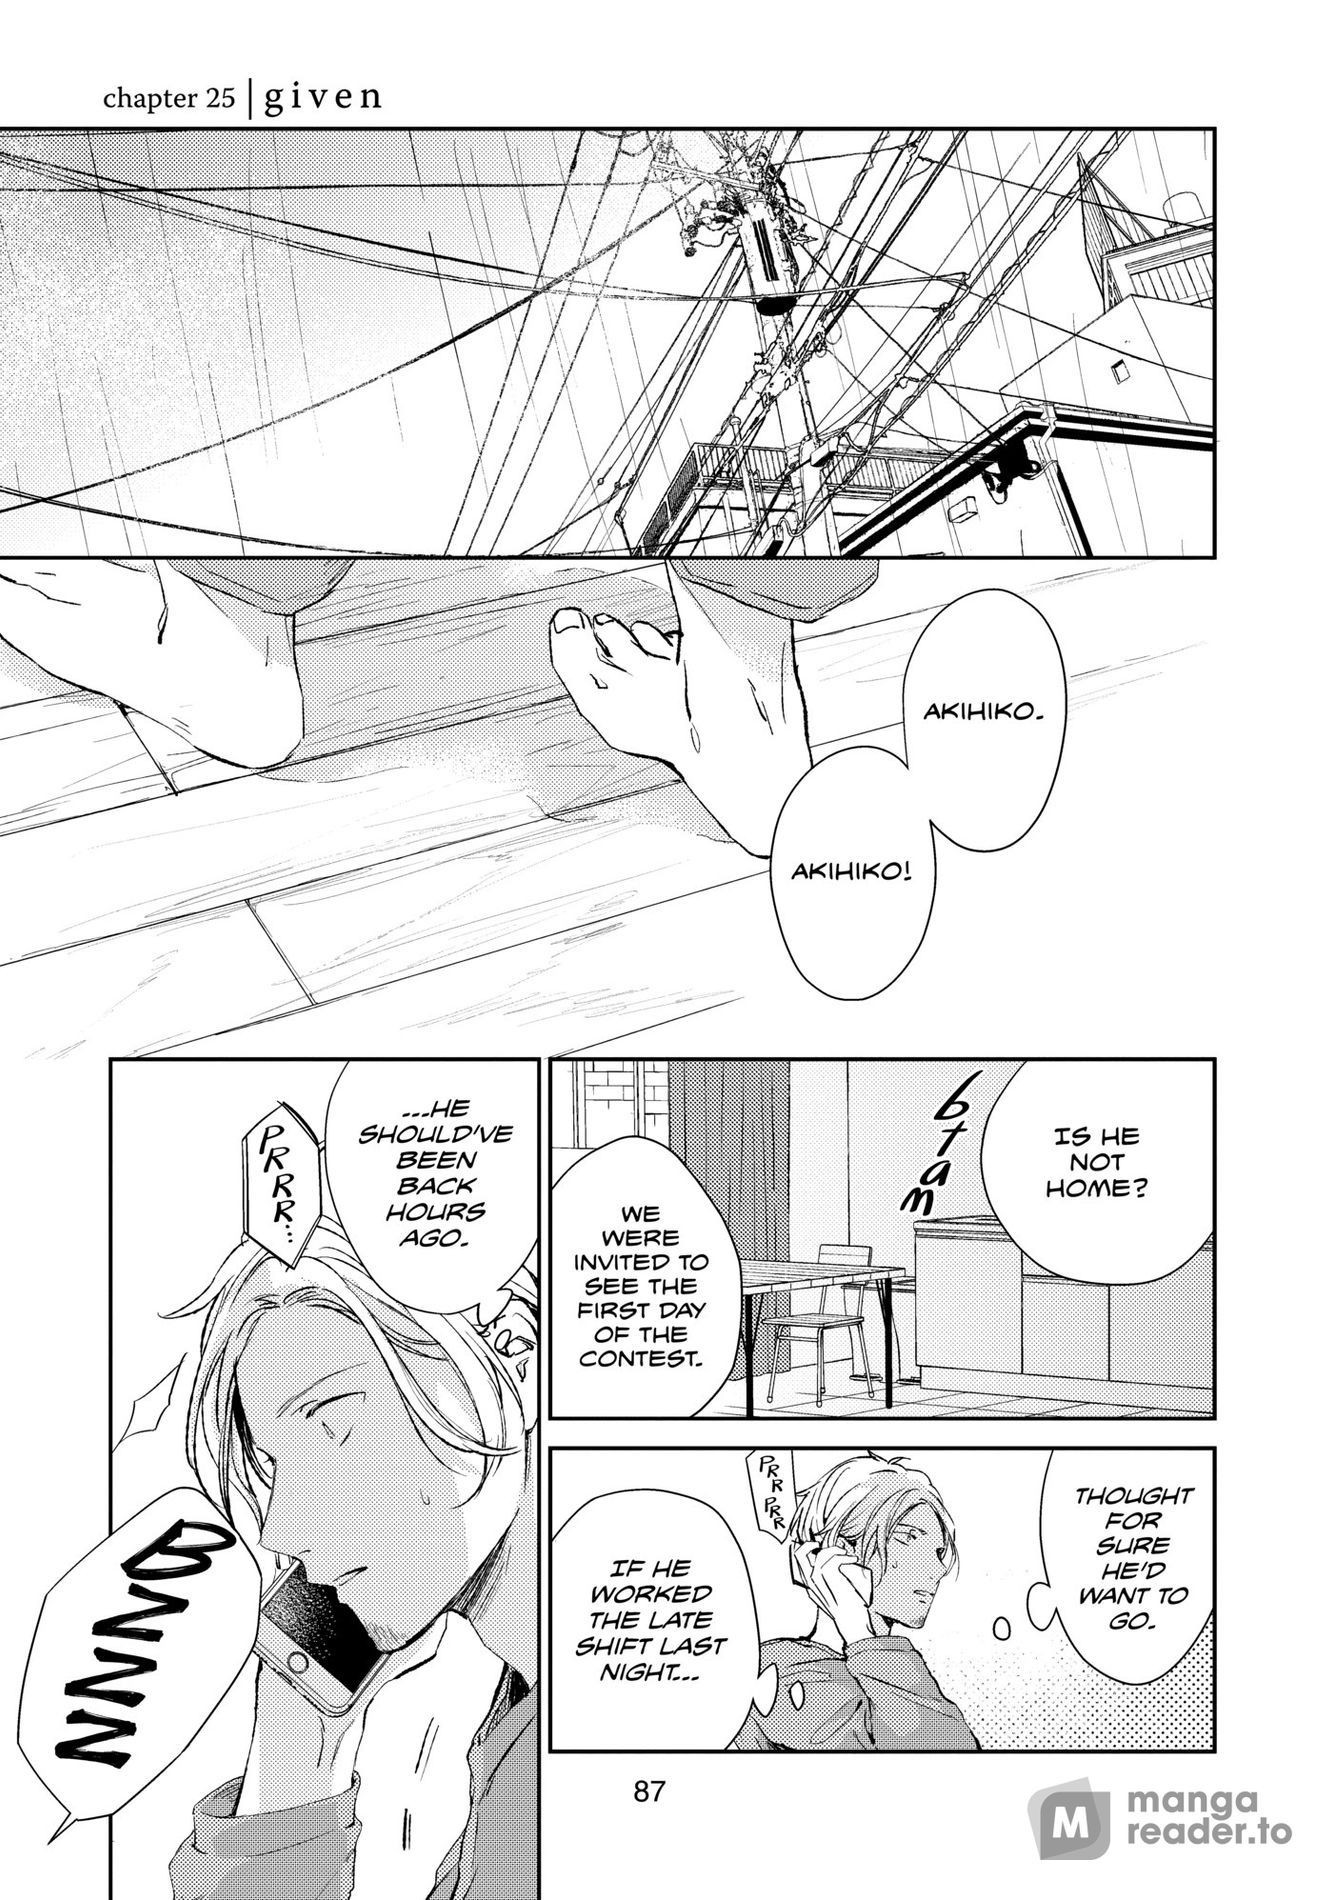 Given, Chapter 25 image 01